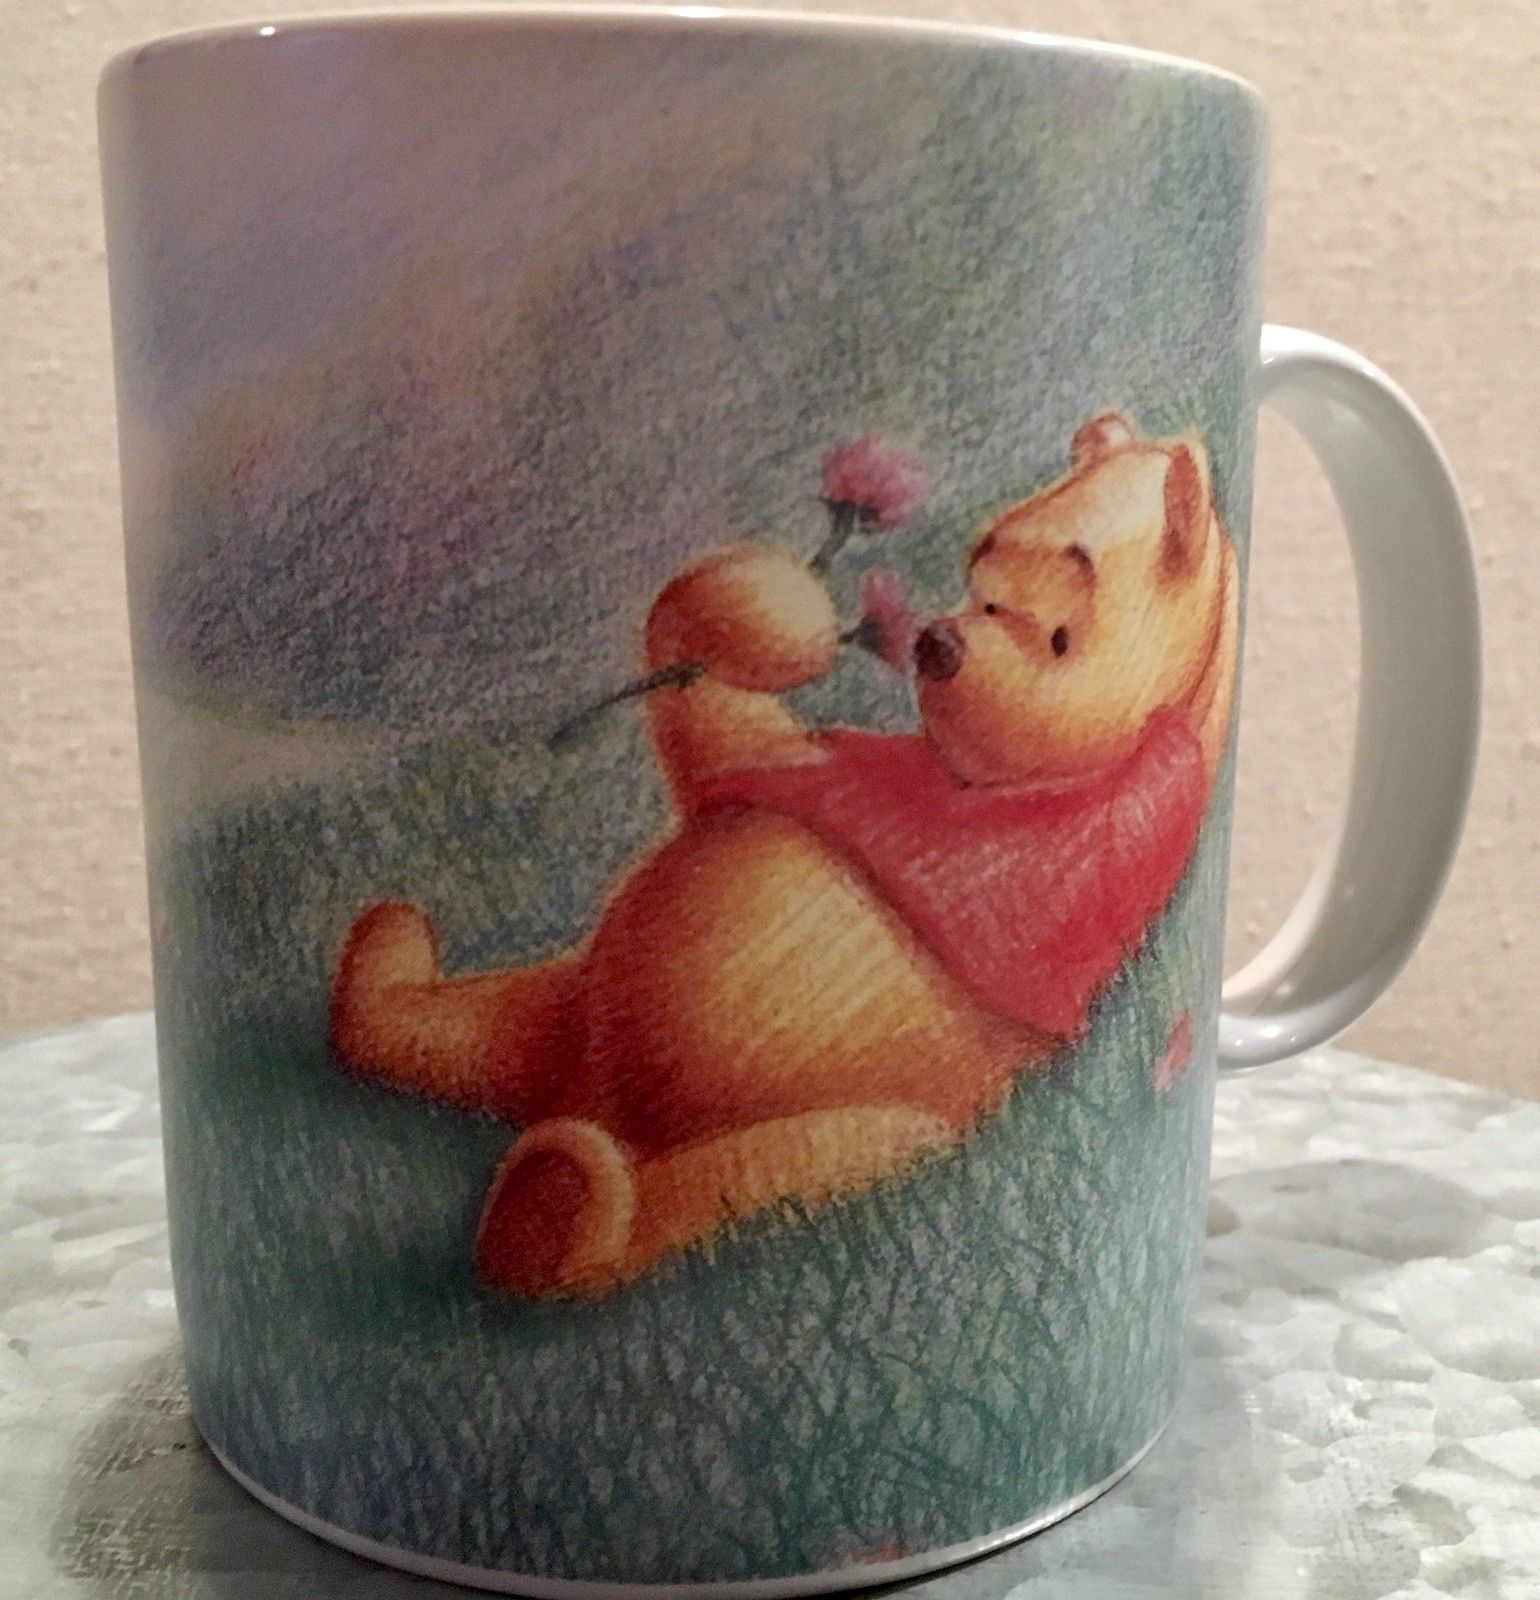 Primary image for Winnie The Pooh Simply Pooh Big Coffee Mug Cup Colored Pencil Drawn Pooh Piglet 